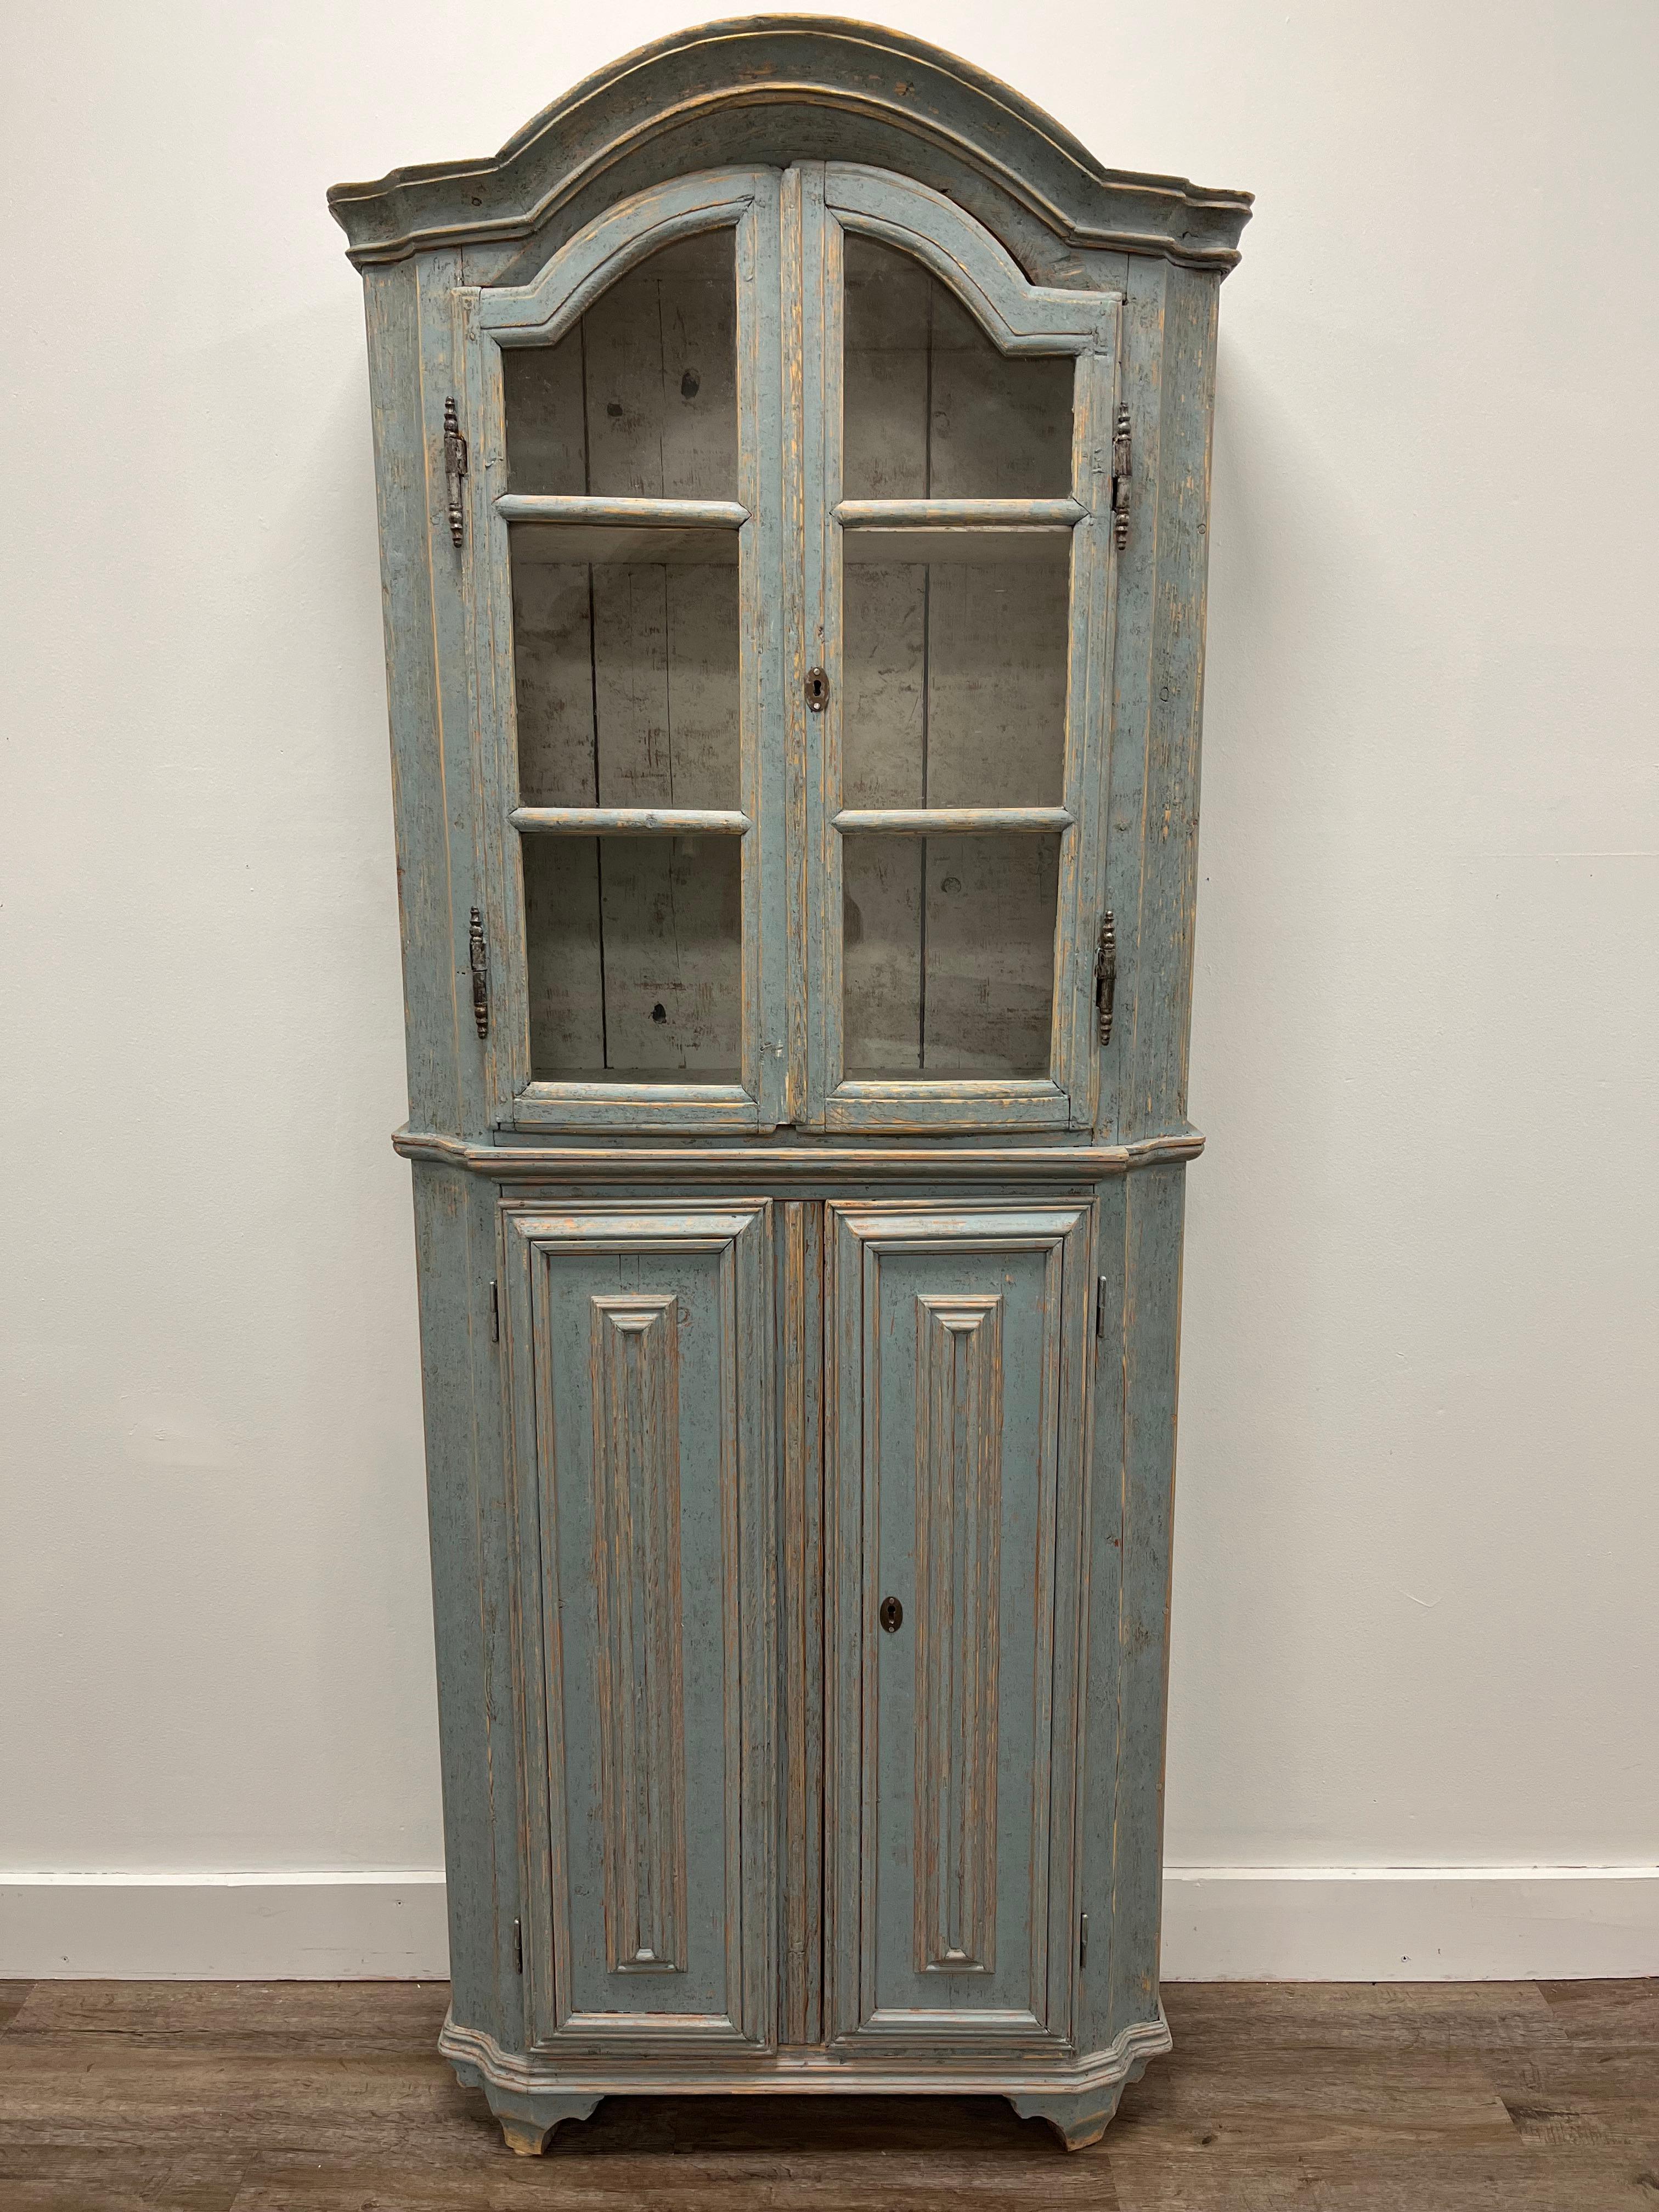 An unusually narrow one-piece Rococo vitrine with original brass hardware and locks. The lower cabinet has later hinges. The upper cabinet has three shelves under a bonnet top with glass doors. The lower cabinet has three shelves behind vertical